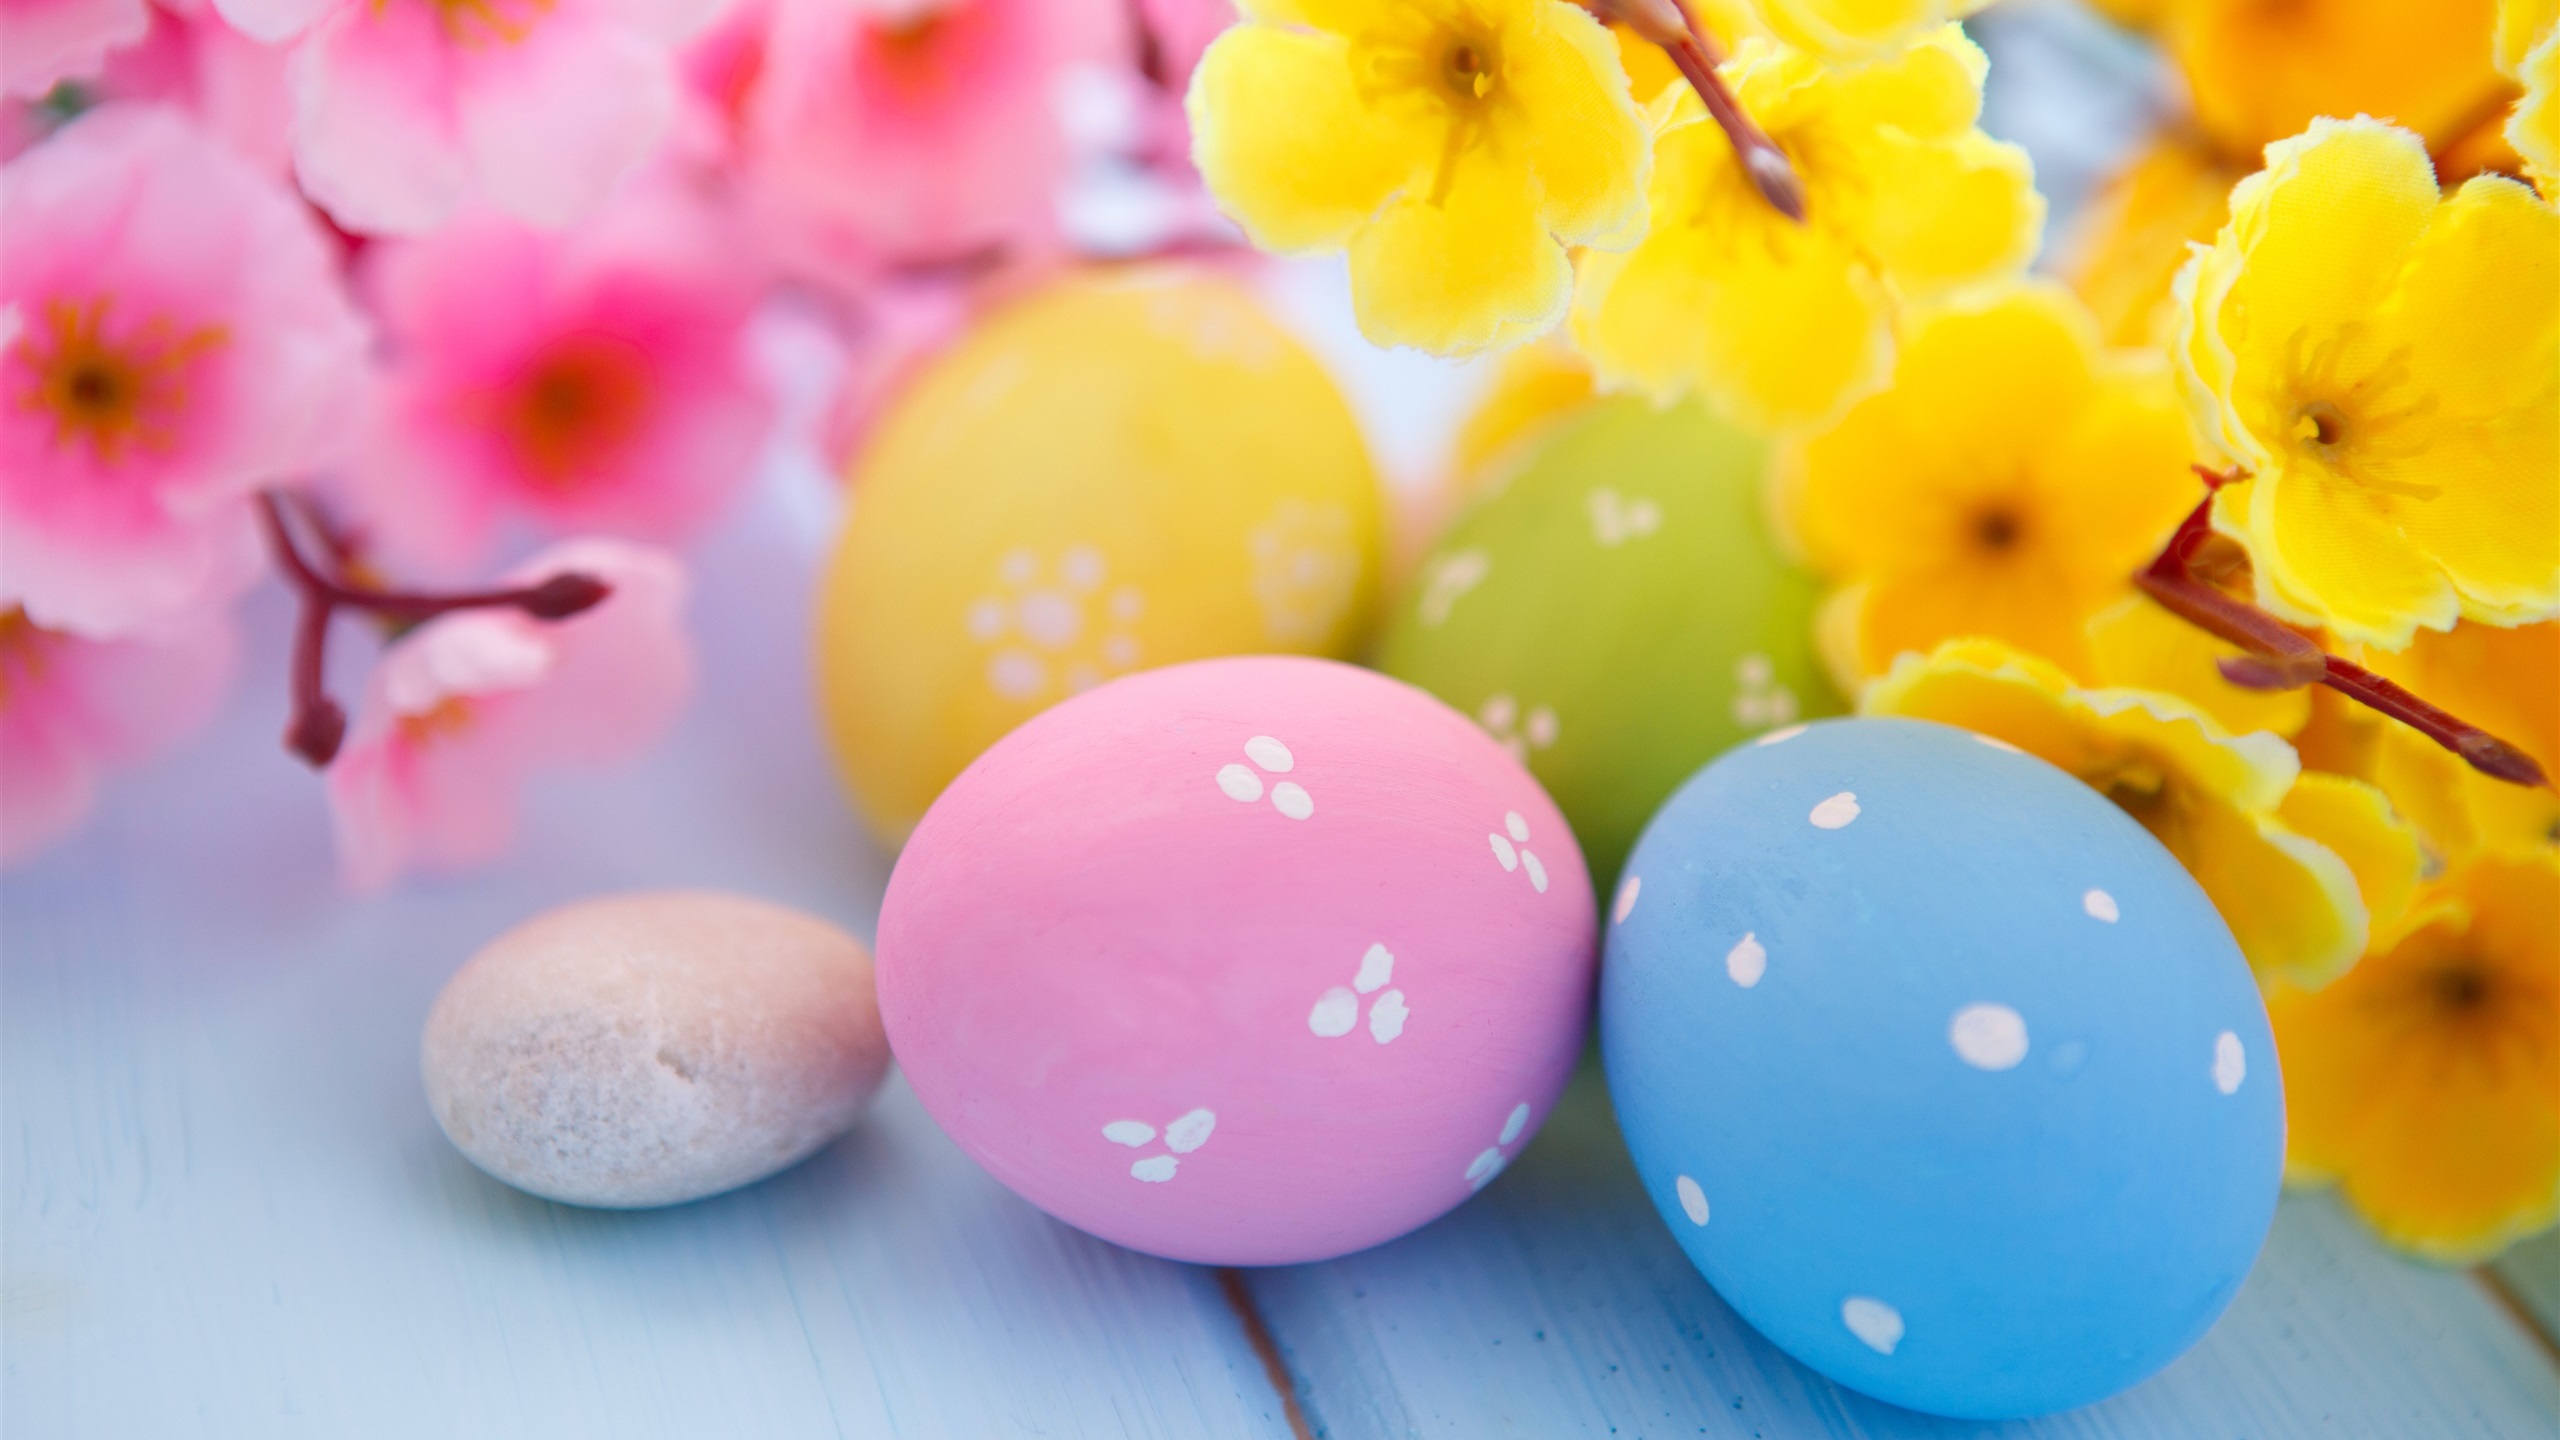 General 2560x1440 easter eggs flowers Easter colorful plants closeup